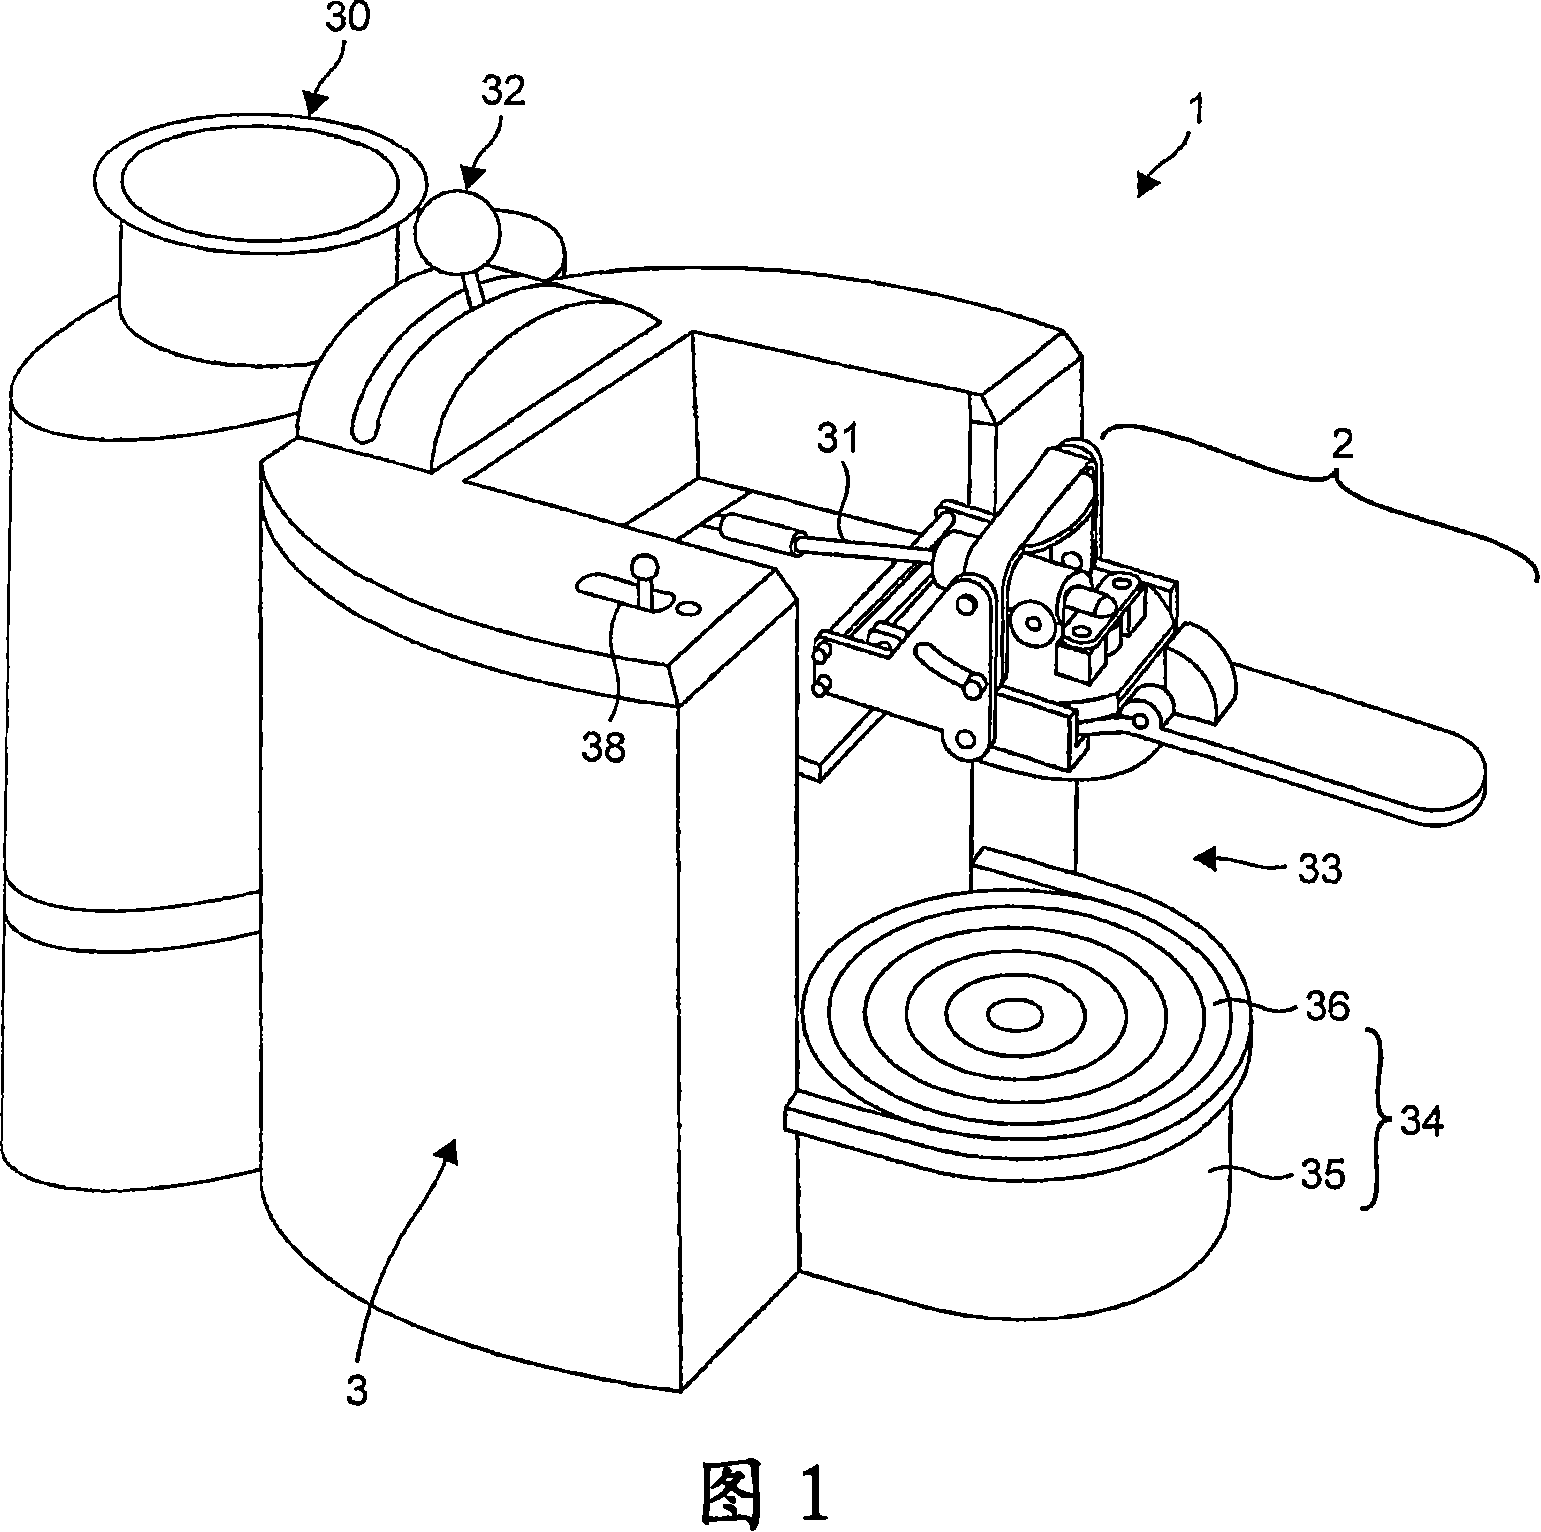 Device for preparing a drink from a capsule by injection of a pressurized fluid and capsule-holder adapted therefore